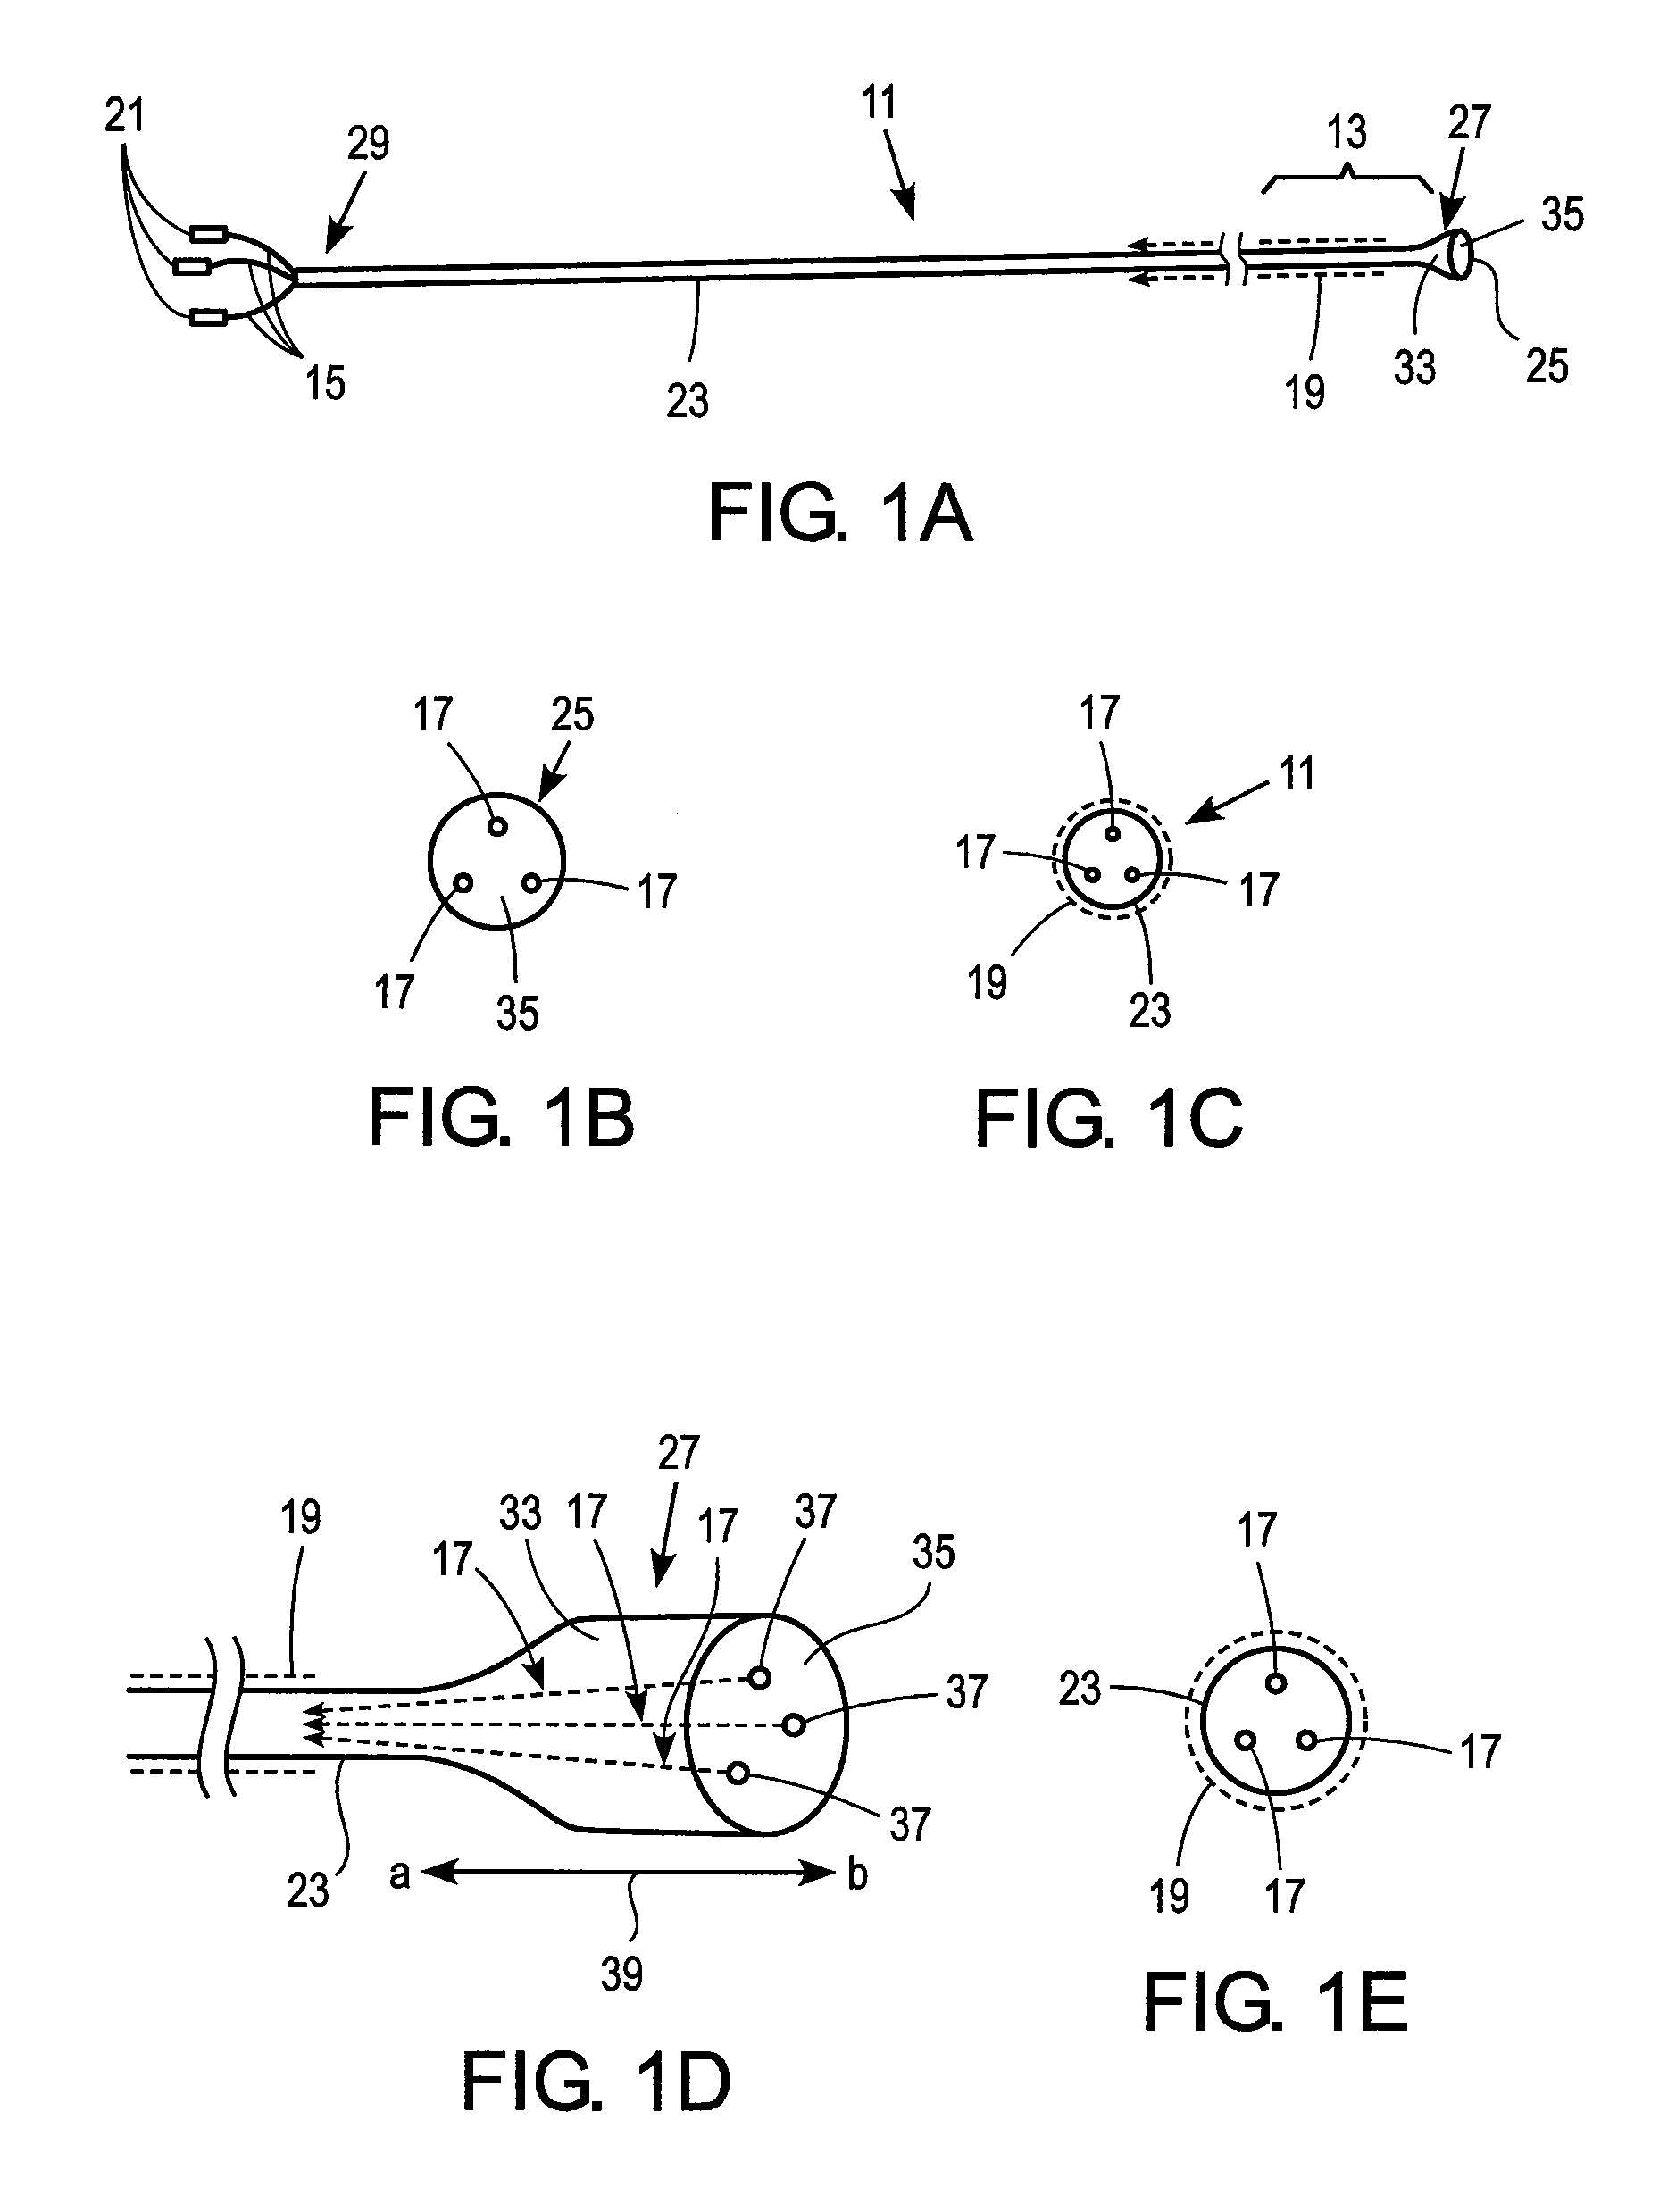 Catheter apparatus and methods for treating vasculatures